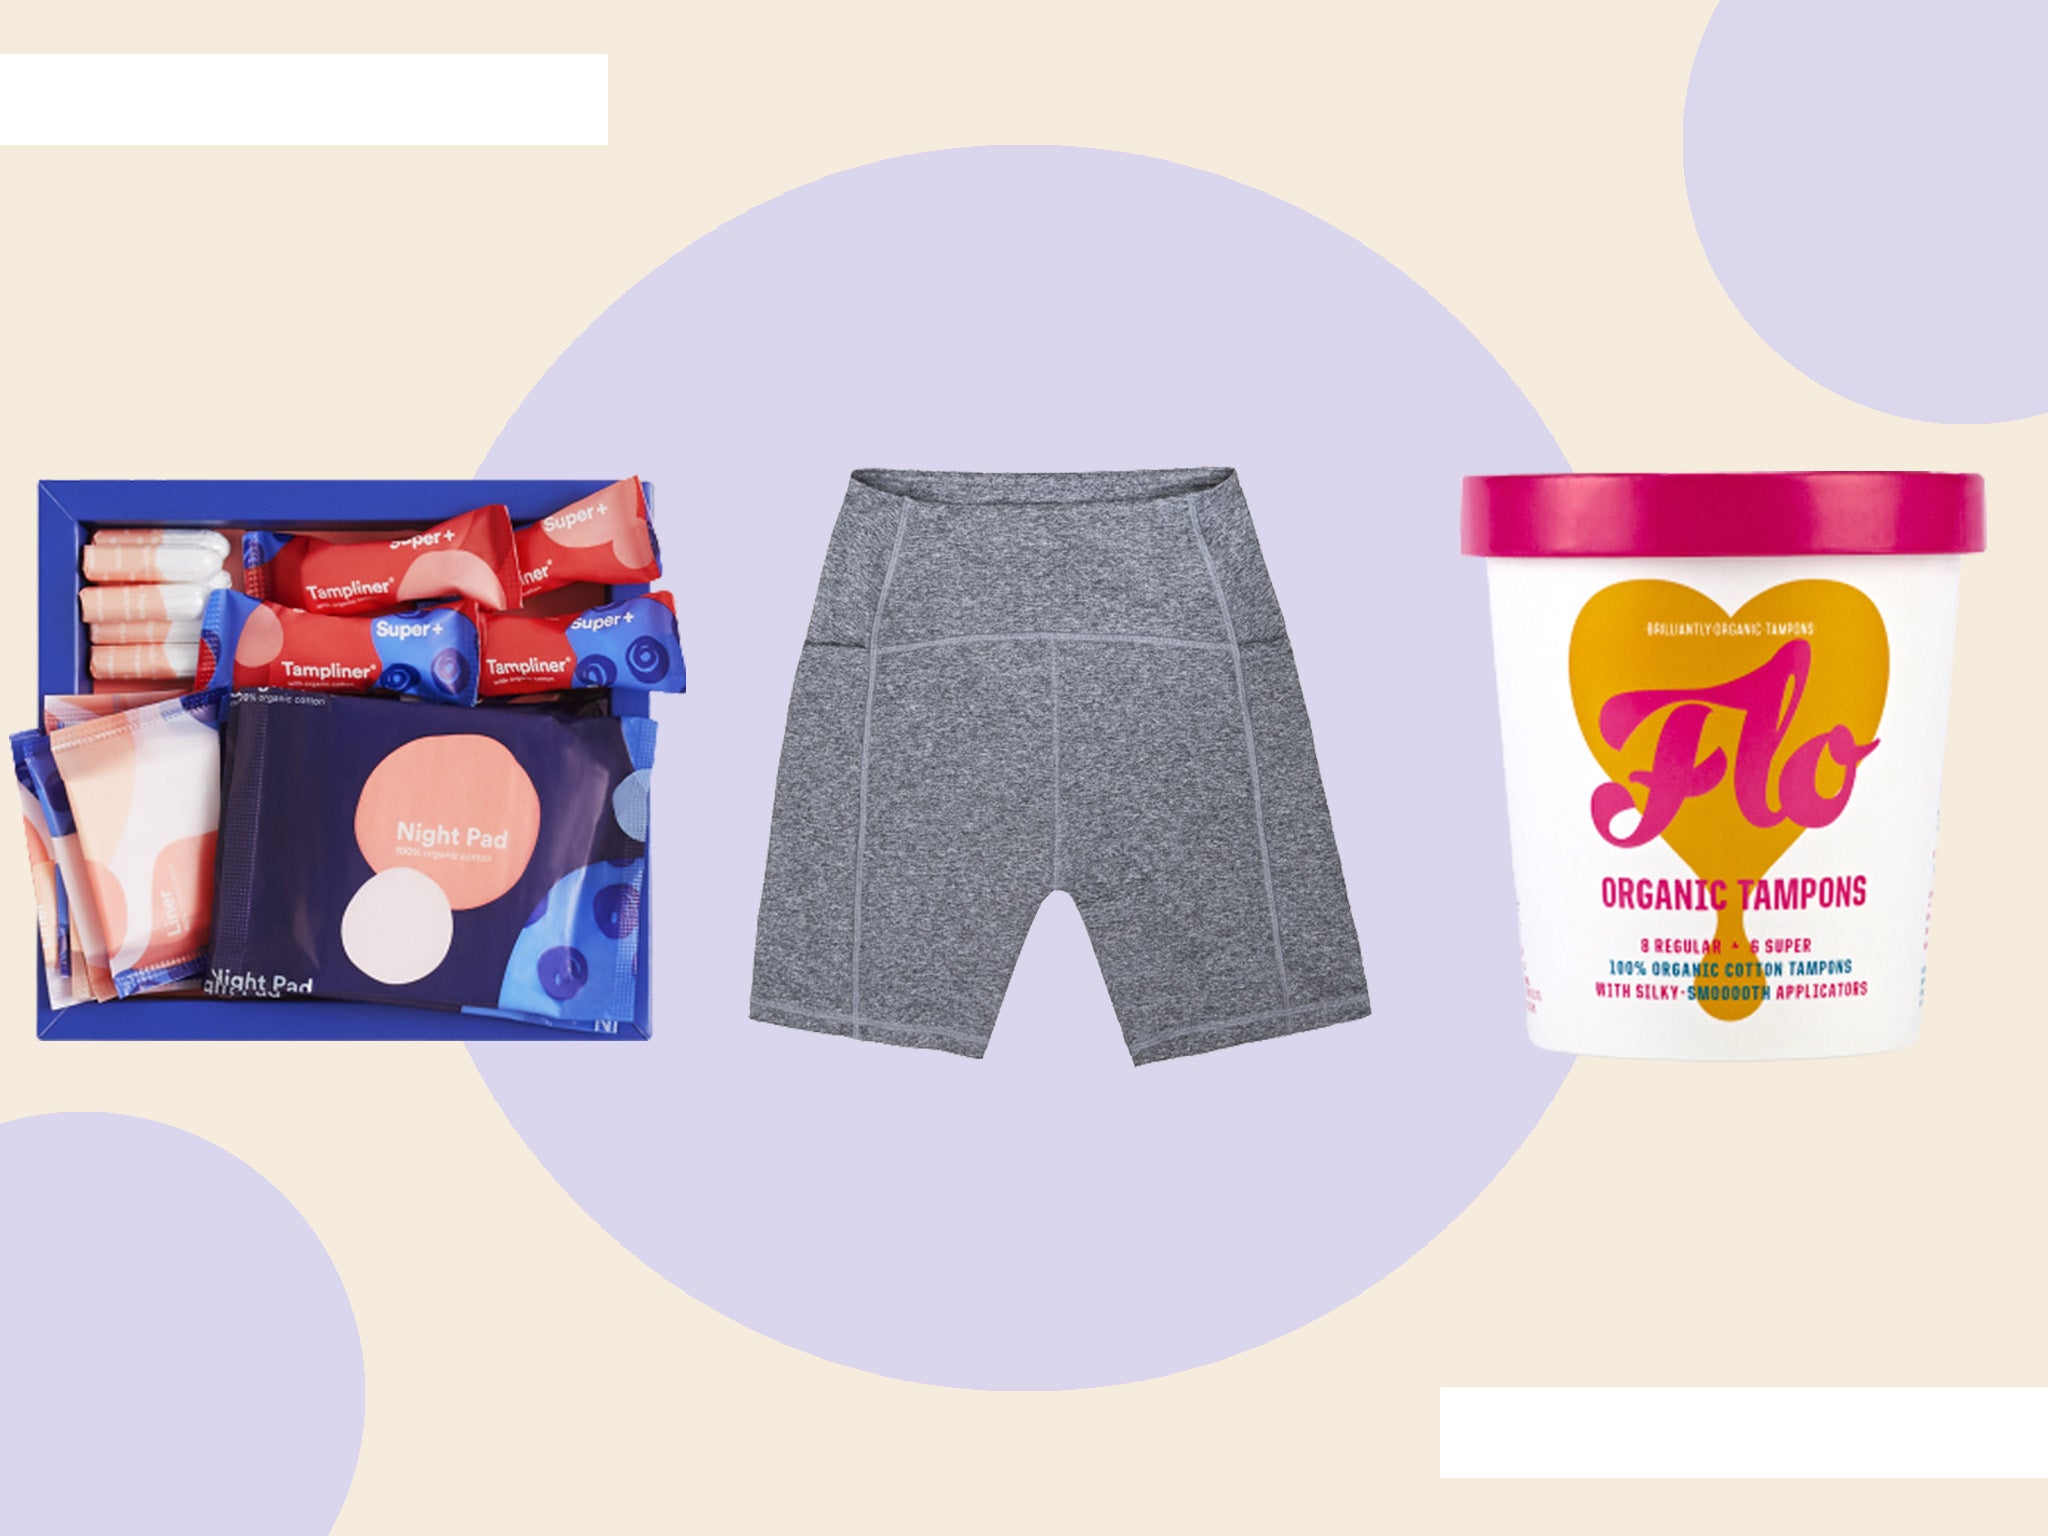 14 best sustainable period products: Sanitary pads, menstrual cups and tampons